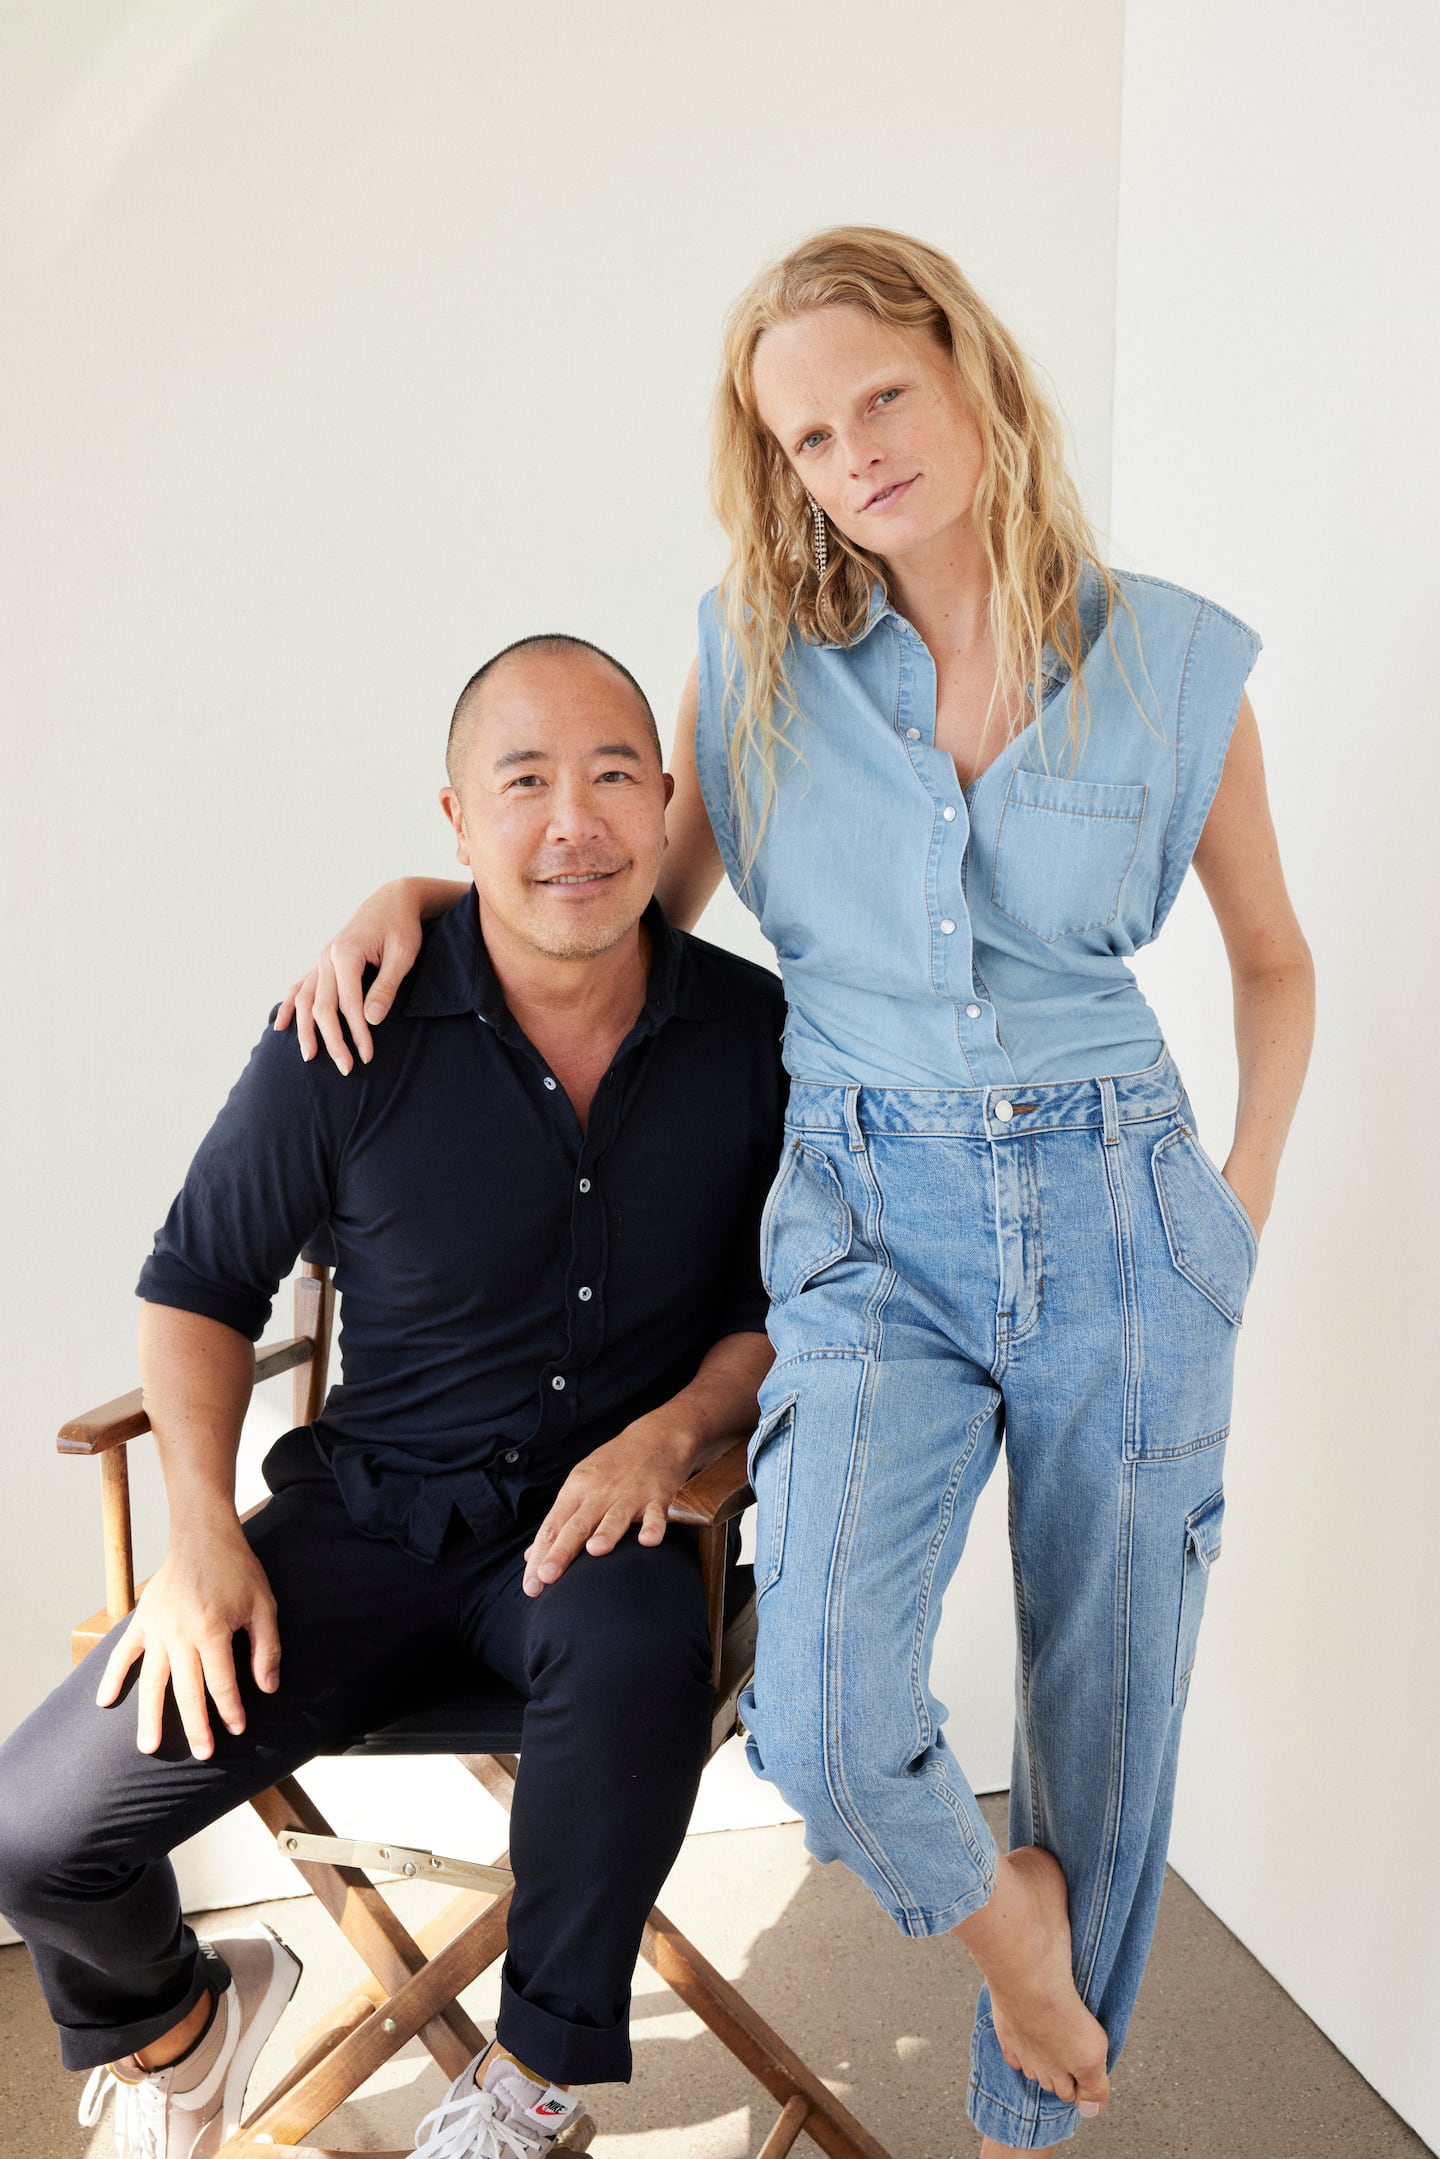 Derek Lam and Hannah Gabe, who starred in the first 10 Crosby ad campaign 10 years ago, at the shoot for the brand's soon-to-be launched denim line. Derek Lam 10 Crosby.